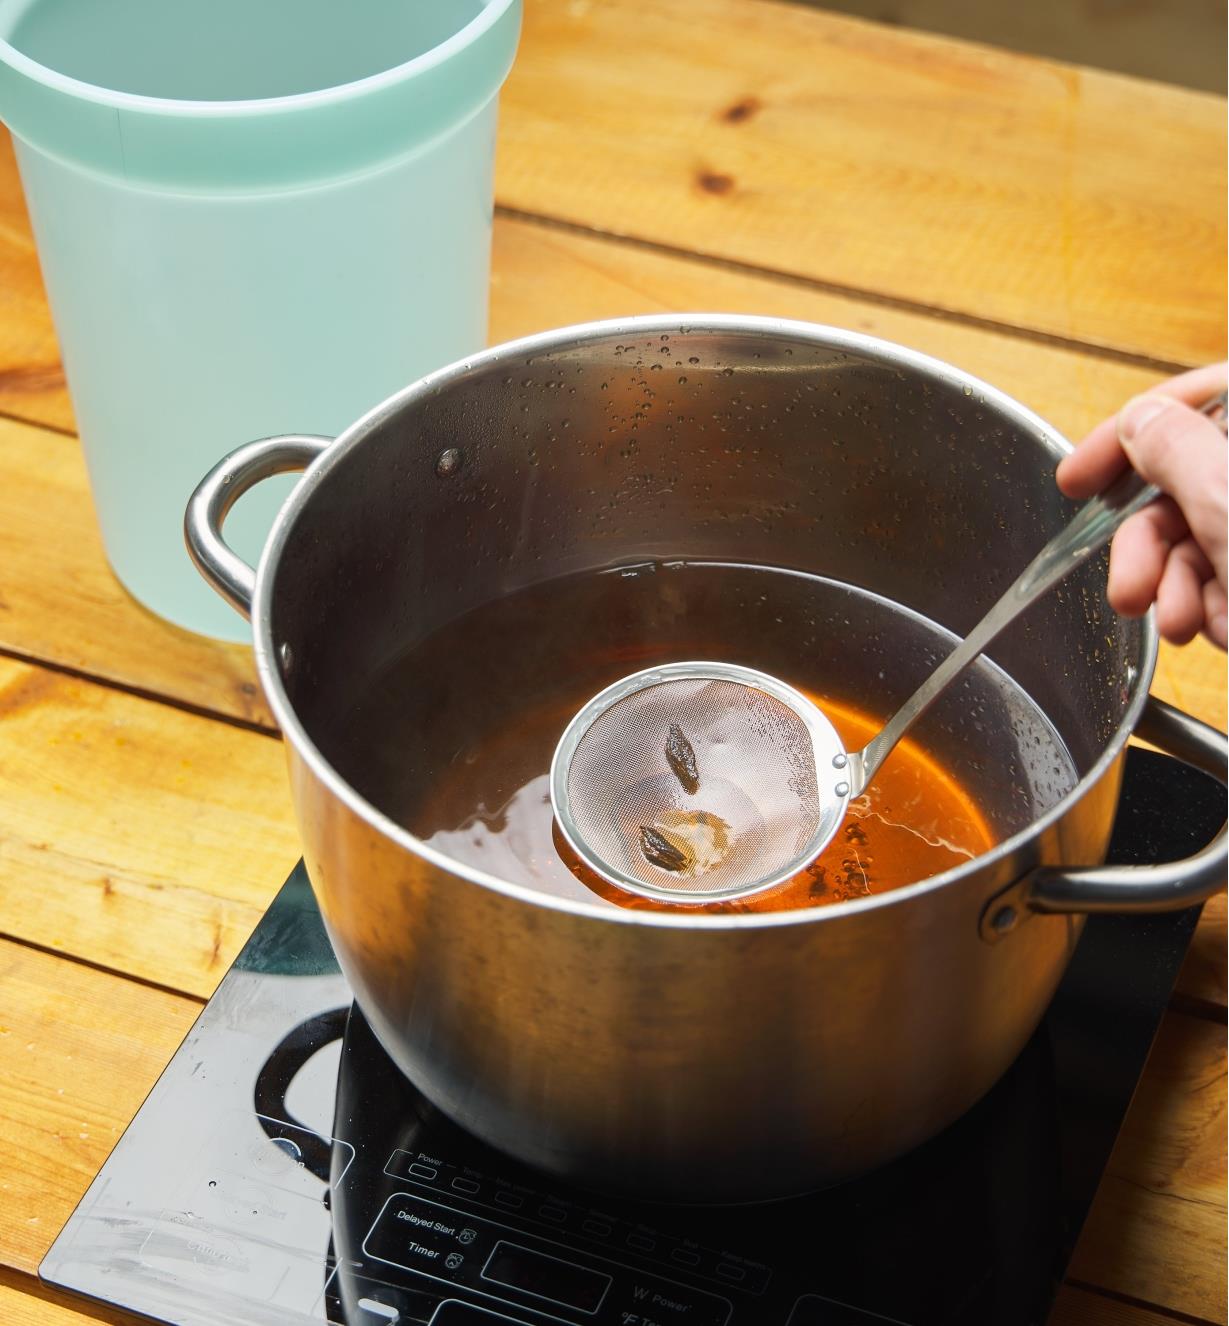 Removing herbs from a pot of liquid using a fine mesh skimming ladle